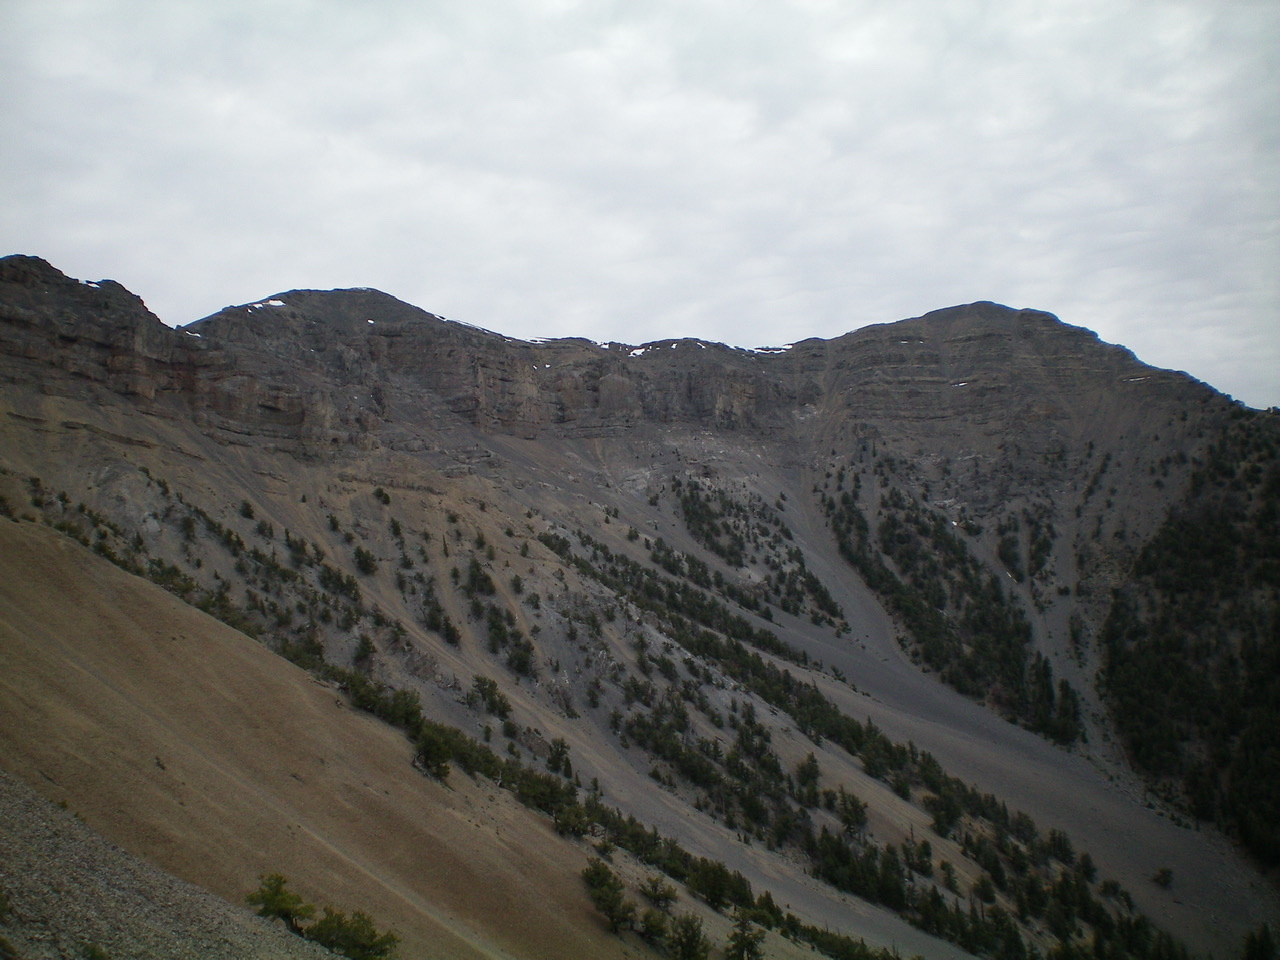 Shril Benchmark (left) and its connecting ridge to Point 10601 (right) as viewed from the southwest. The peaks appear, and are, of similar height. There is a gentle, albeit rocky, saddle between them. Livingston Douglas Photo 